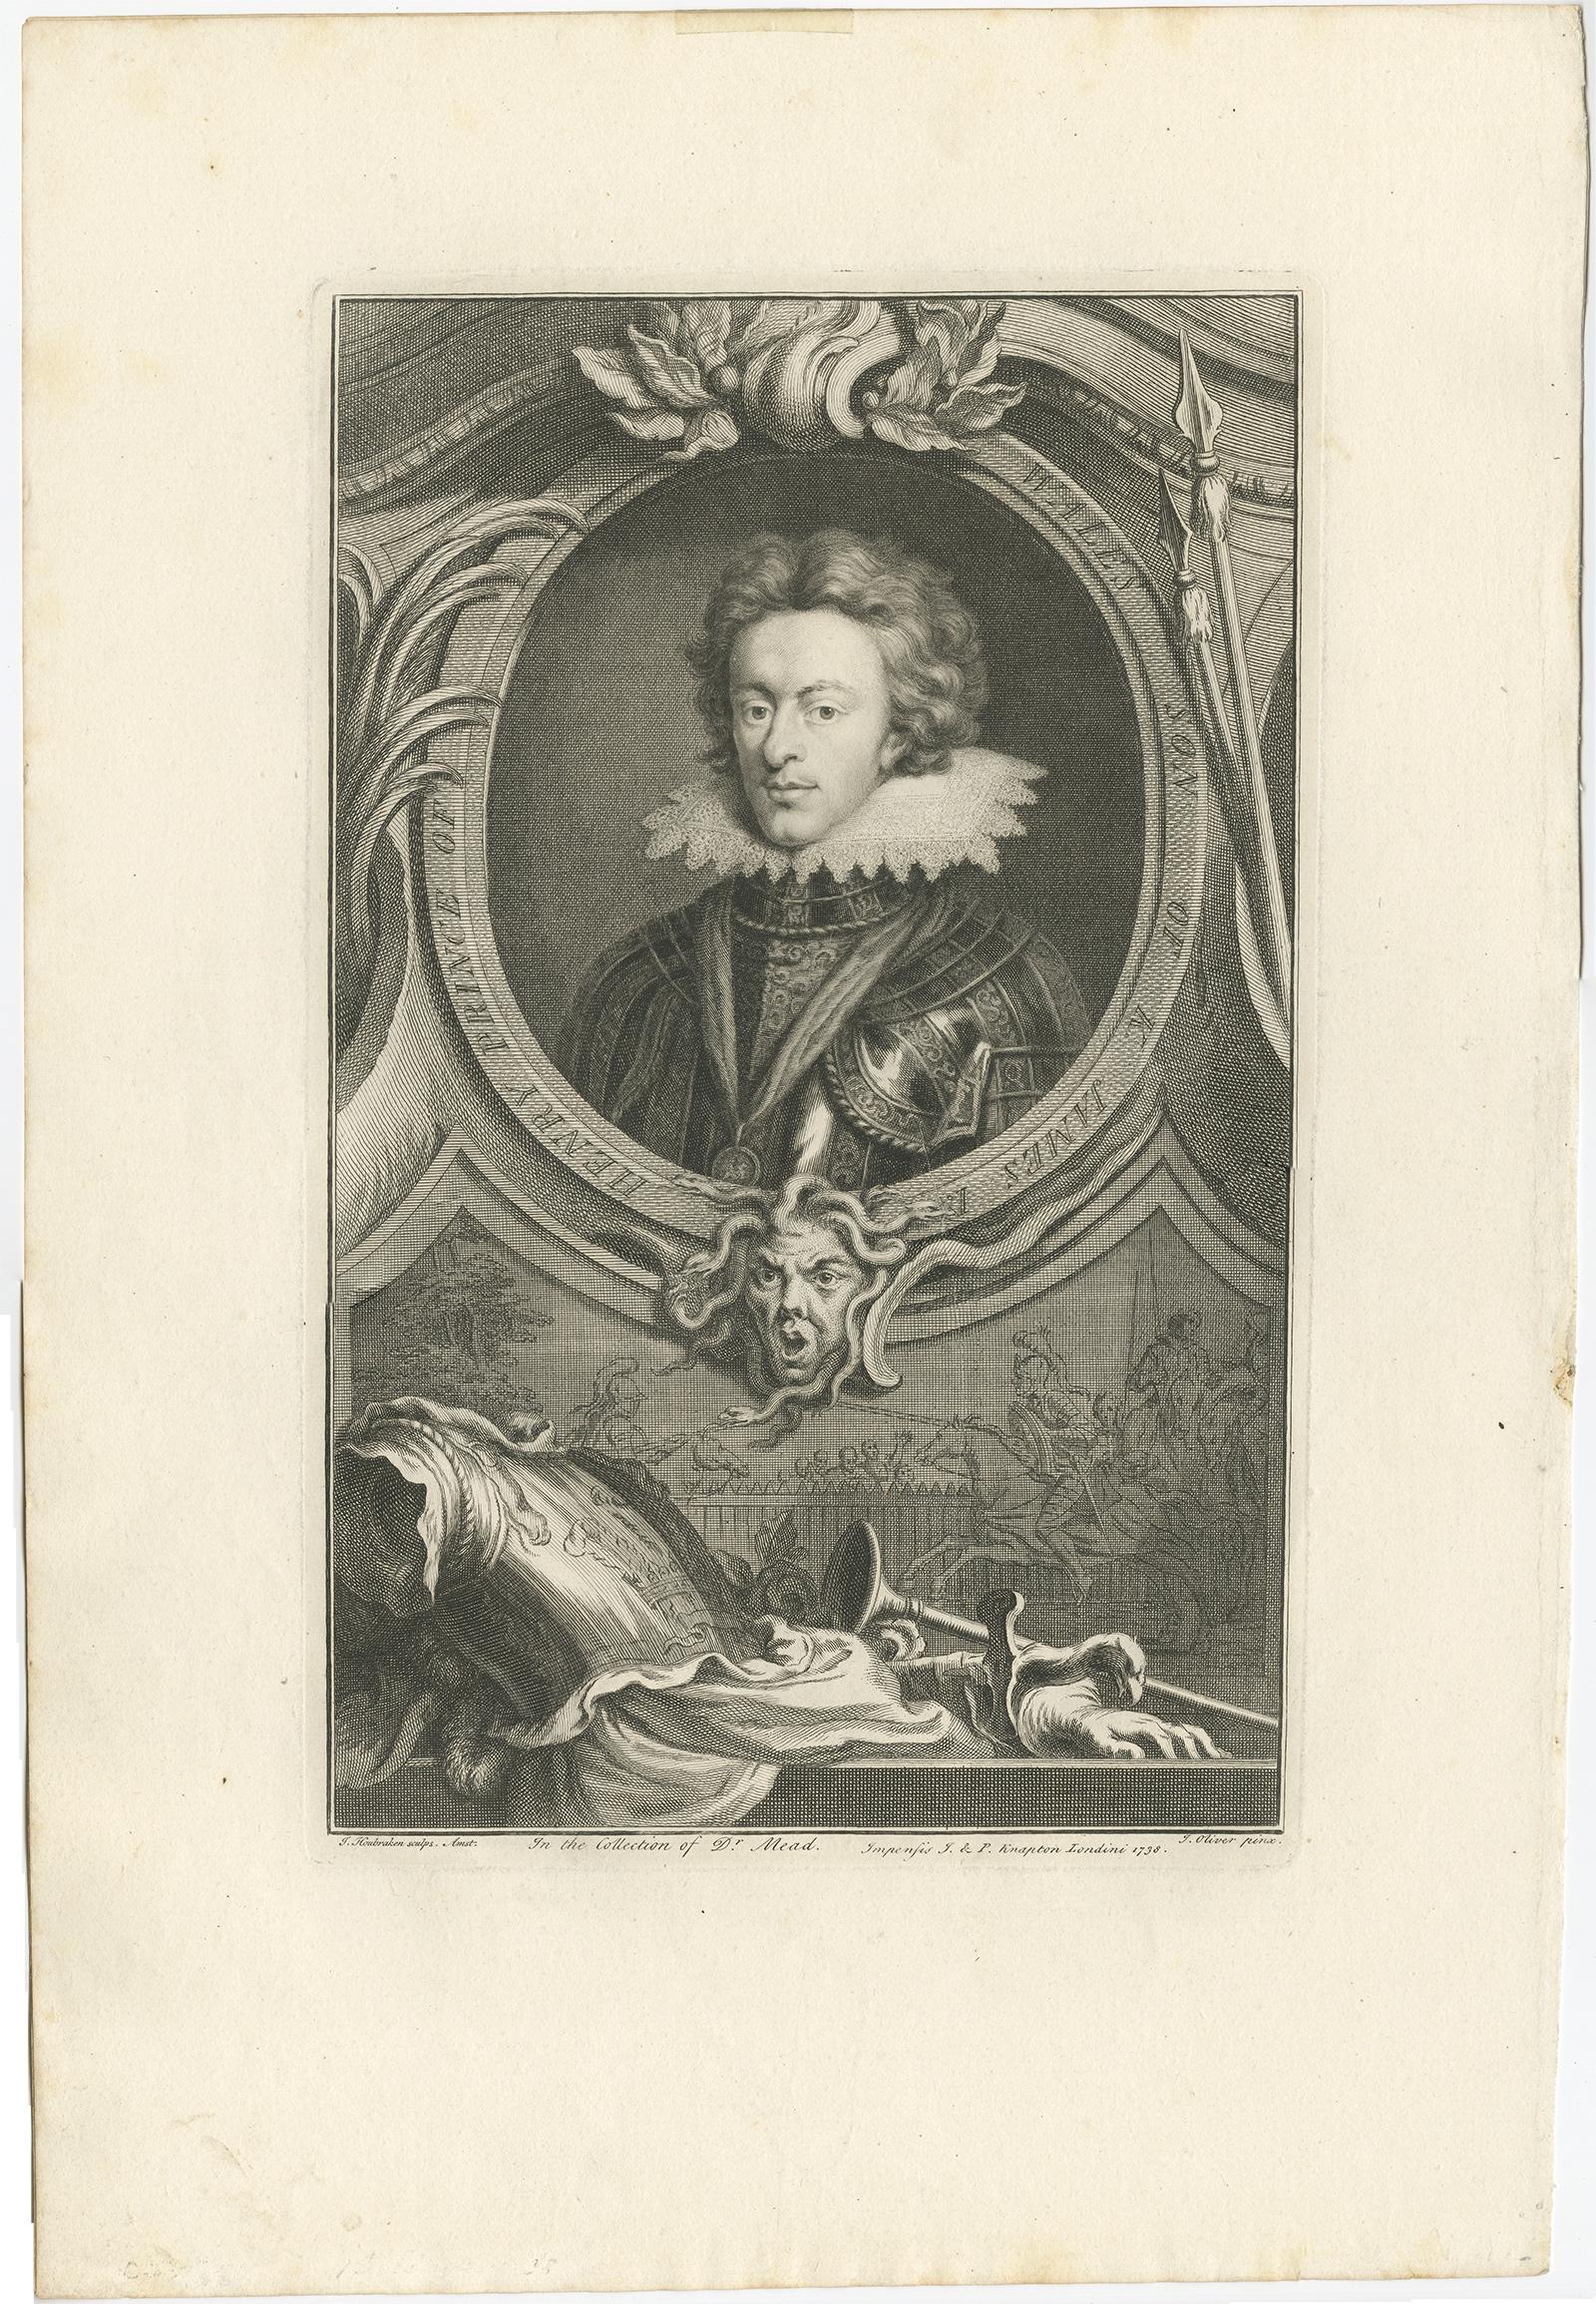 Antique portrait titled 'Henry, Prince of Wales, Son of K. James I'. 

Old portrait of Henry Frederick. Henry Frederick, Prince of Wales (1594-1612) was the elder son of James VI and I, King of England and Scotland, and his wife, Anne of Denmark.